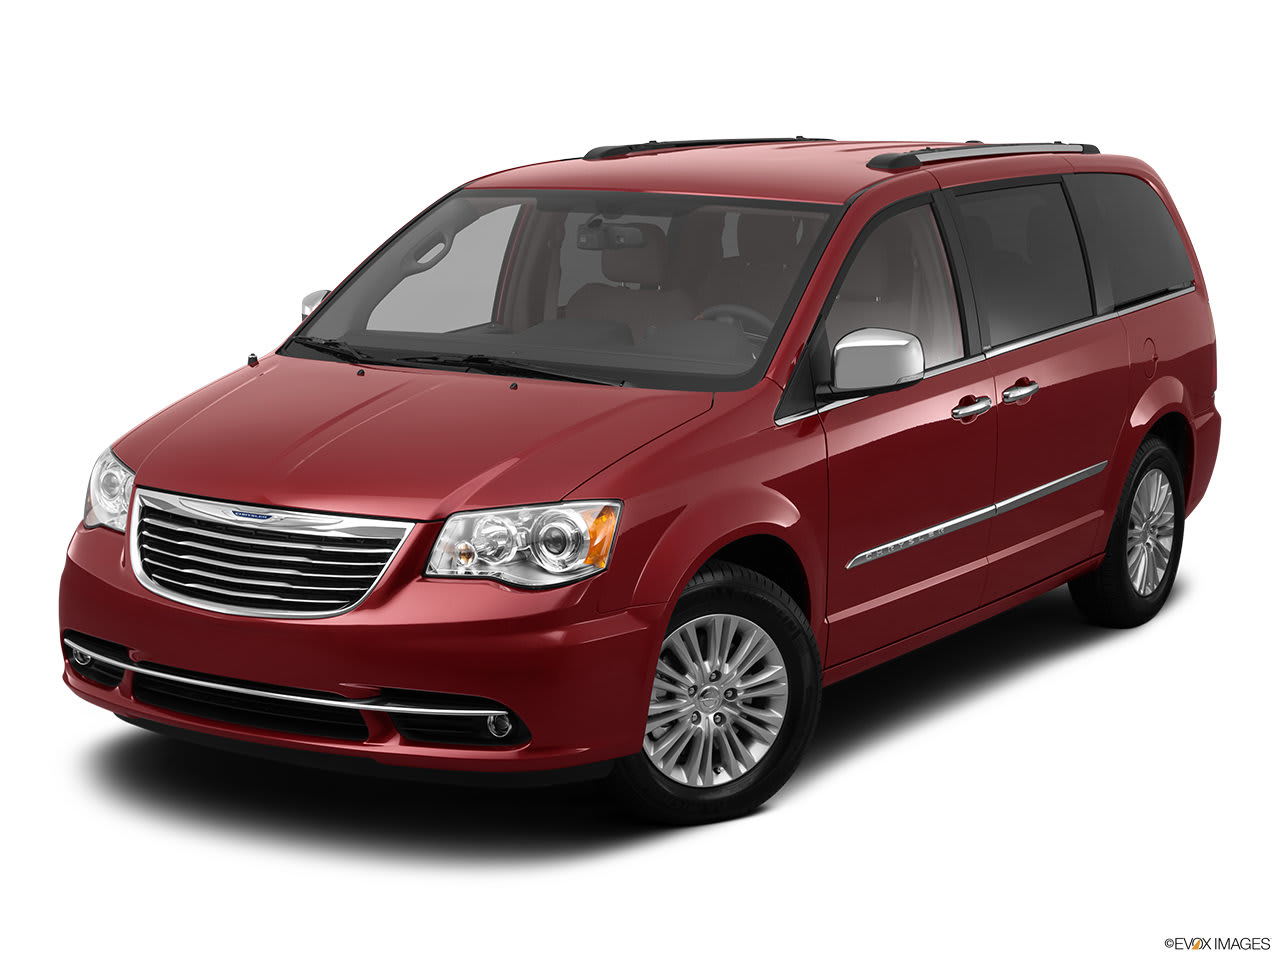 A Buyer’s Guide to the 2012 Chrysler Town & Country